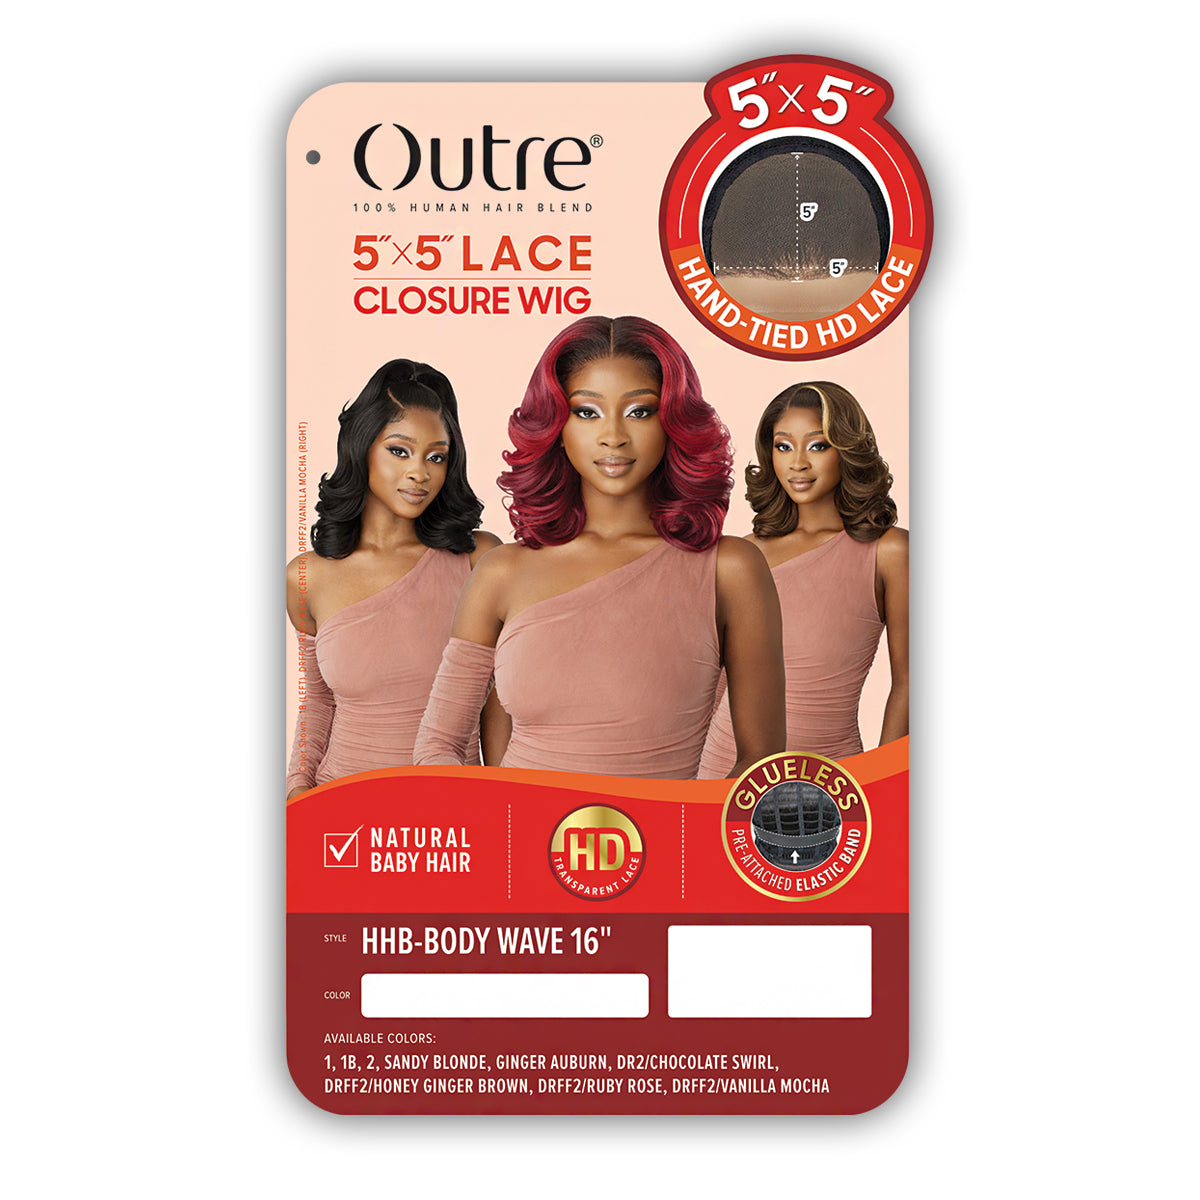 Outre 100% Human Hair Blend 5x5 Glueless HD Lace Closure Wig - HHB BODY WAVE 16